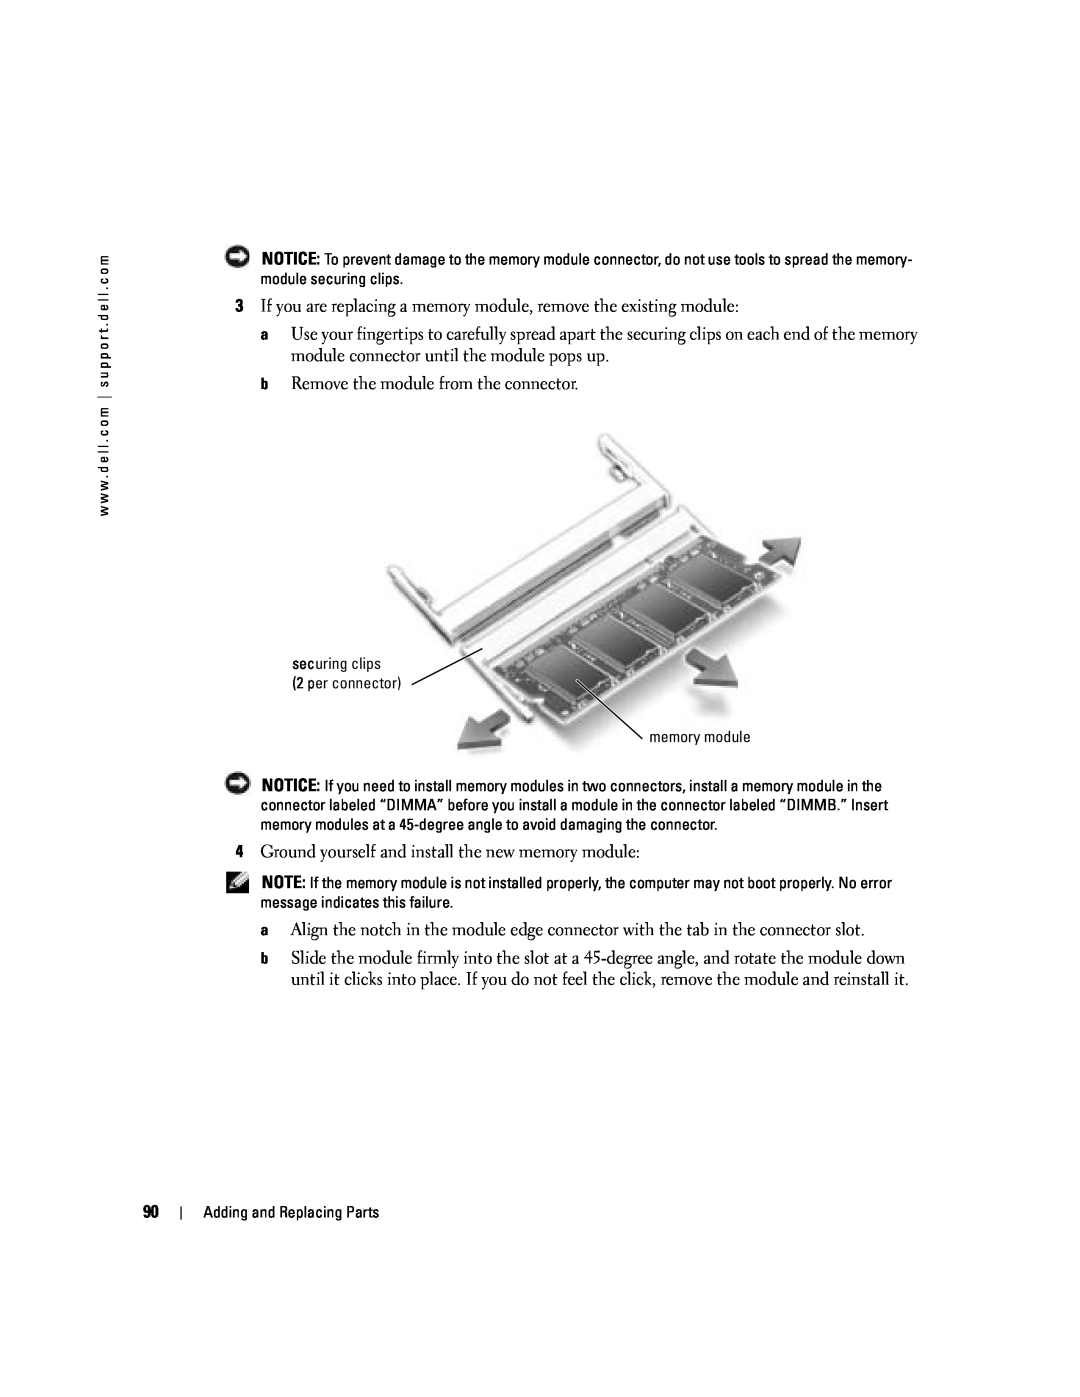 Dell PP10L owner manual If you are replacing a memory module, remove the existing module 